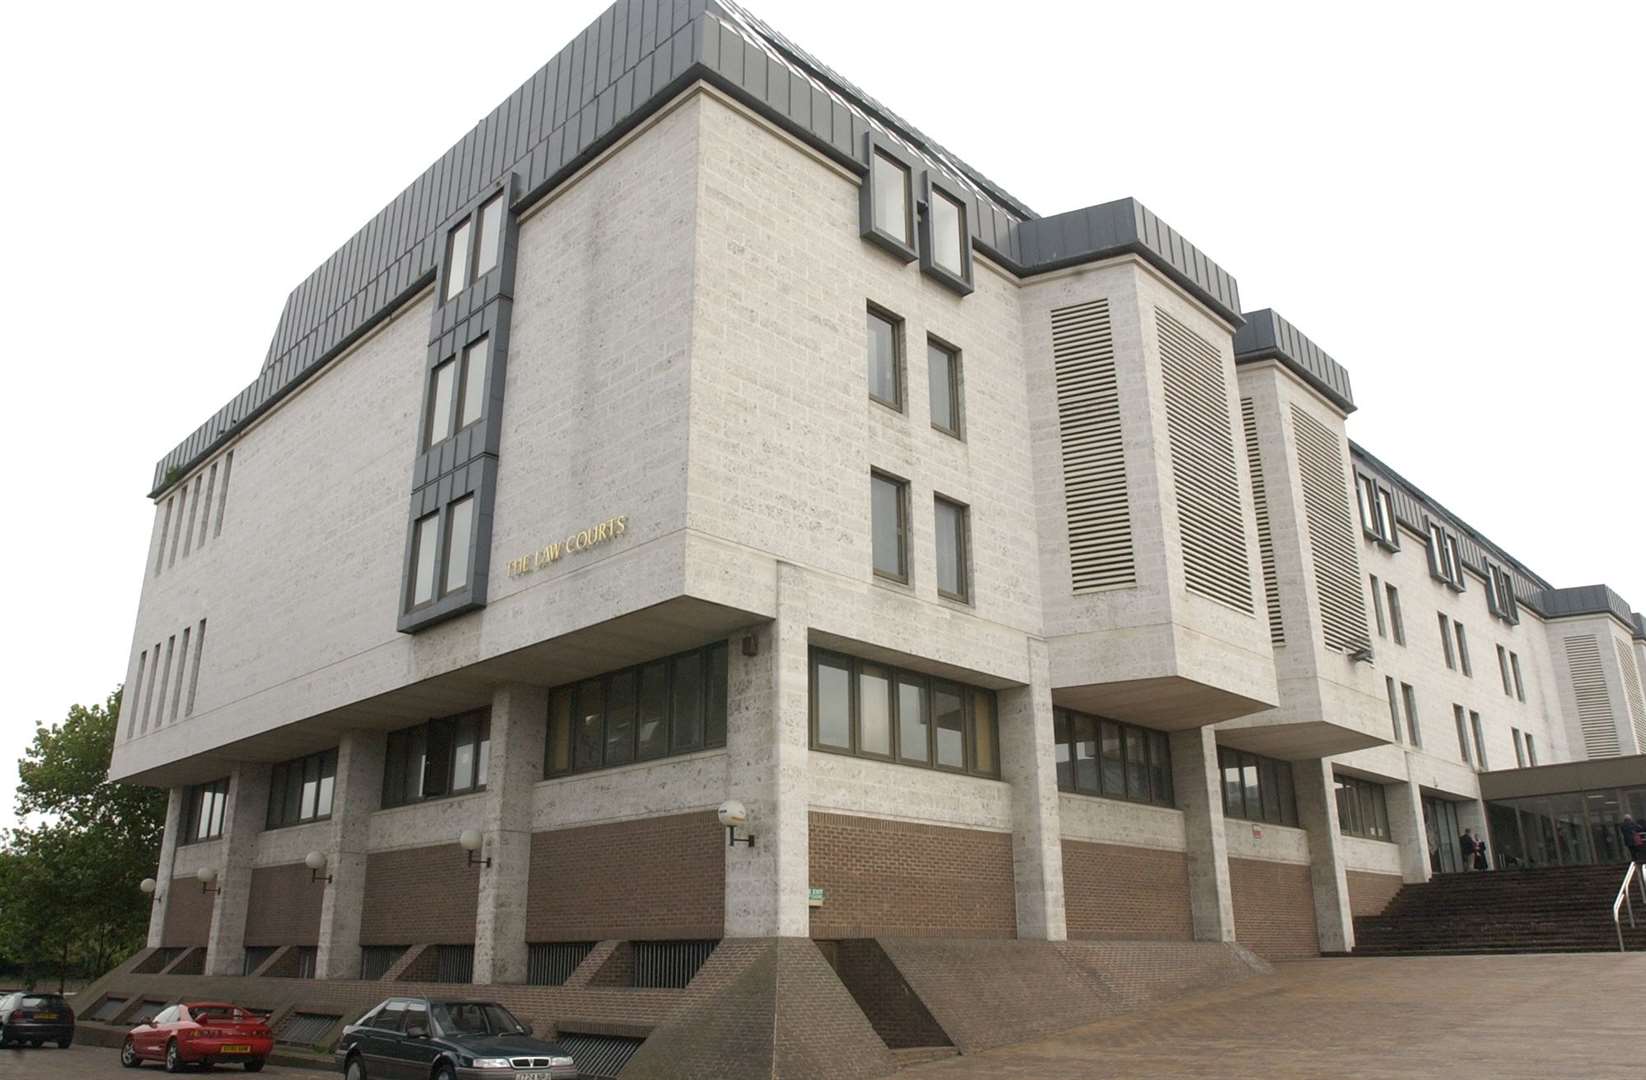 The case is being heard at Maidstone Crown Court